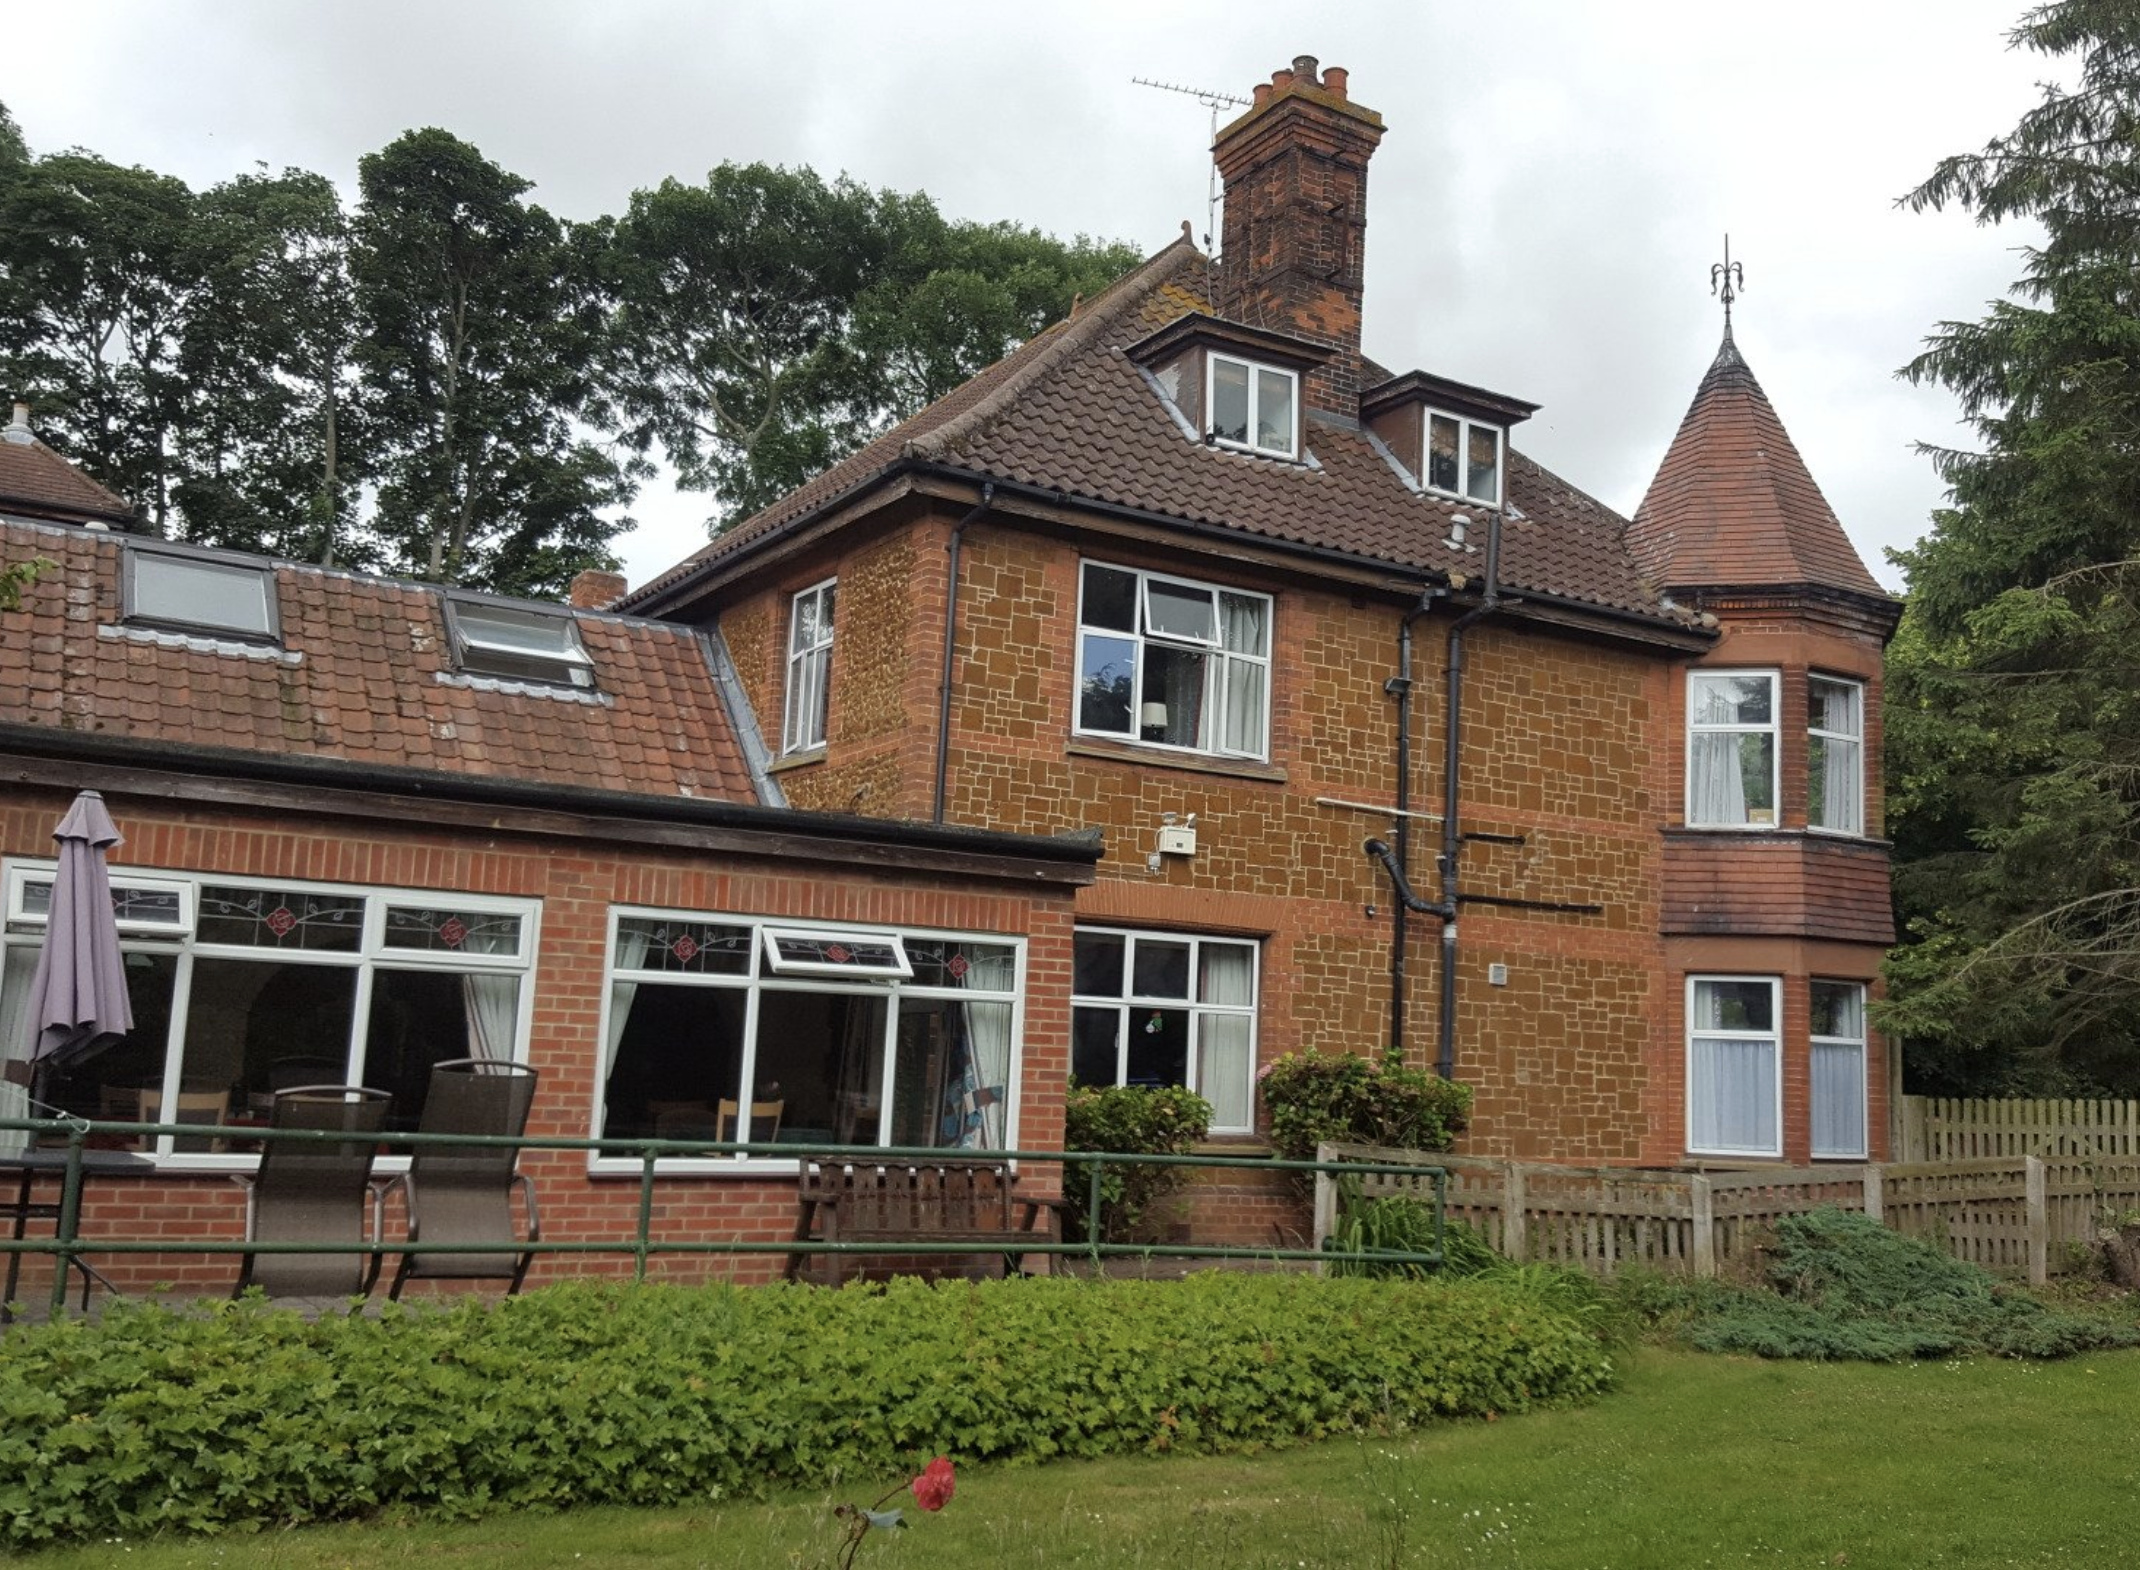 Exterior of Wyndam House care home in North Wooton, Norfolk